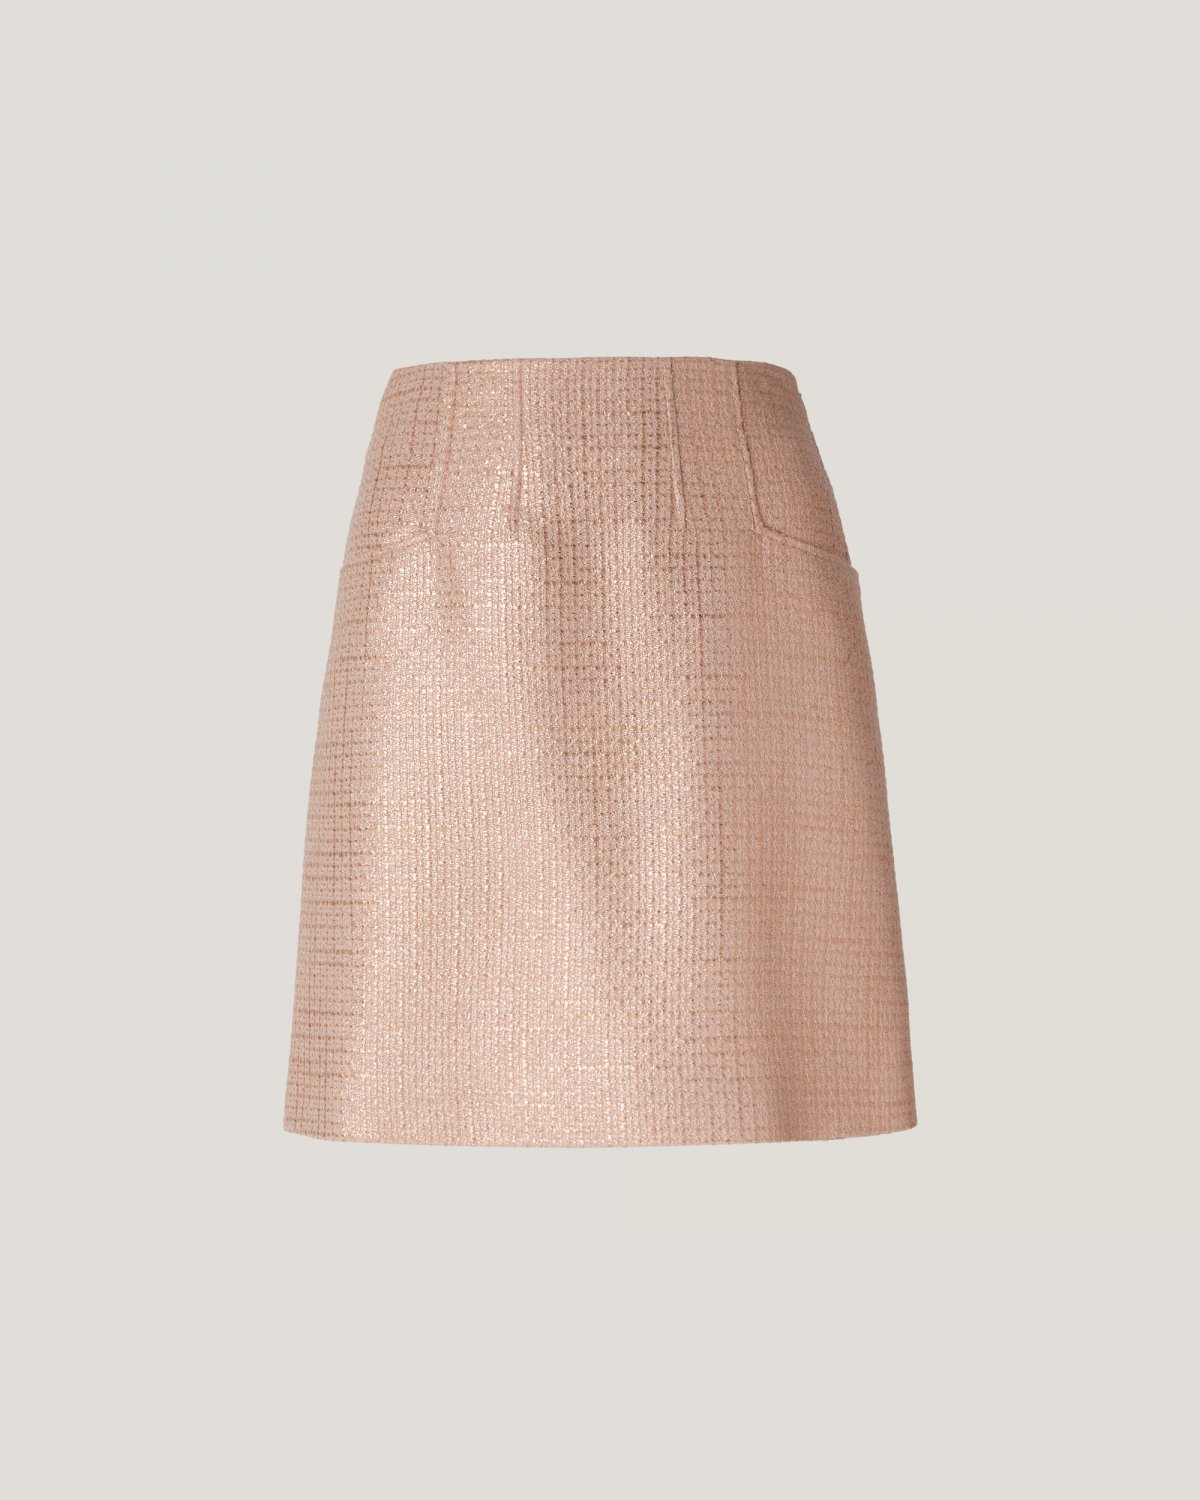 Tweed laminated mini skirt | PRE-FALL Collection 2023, Fall Winter 2023-24, Skirts & Trousers, Skirt | Genny